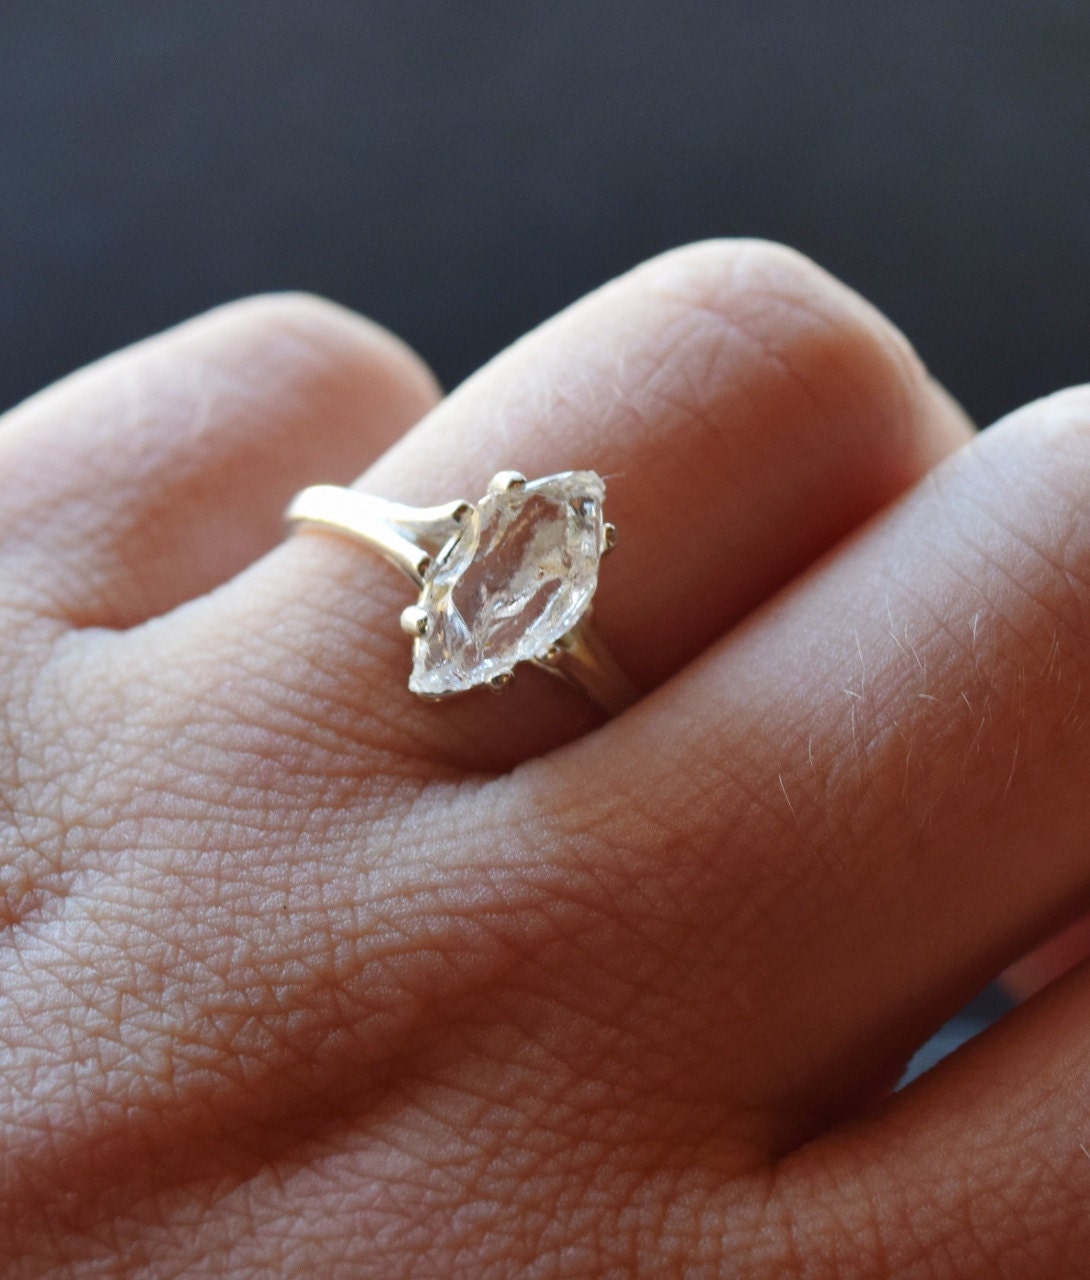 Rough Uncut Raw Diamond Ring Sterling Silver Engagement by